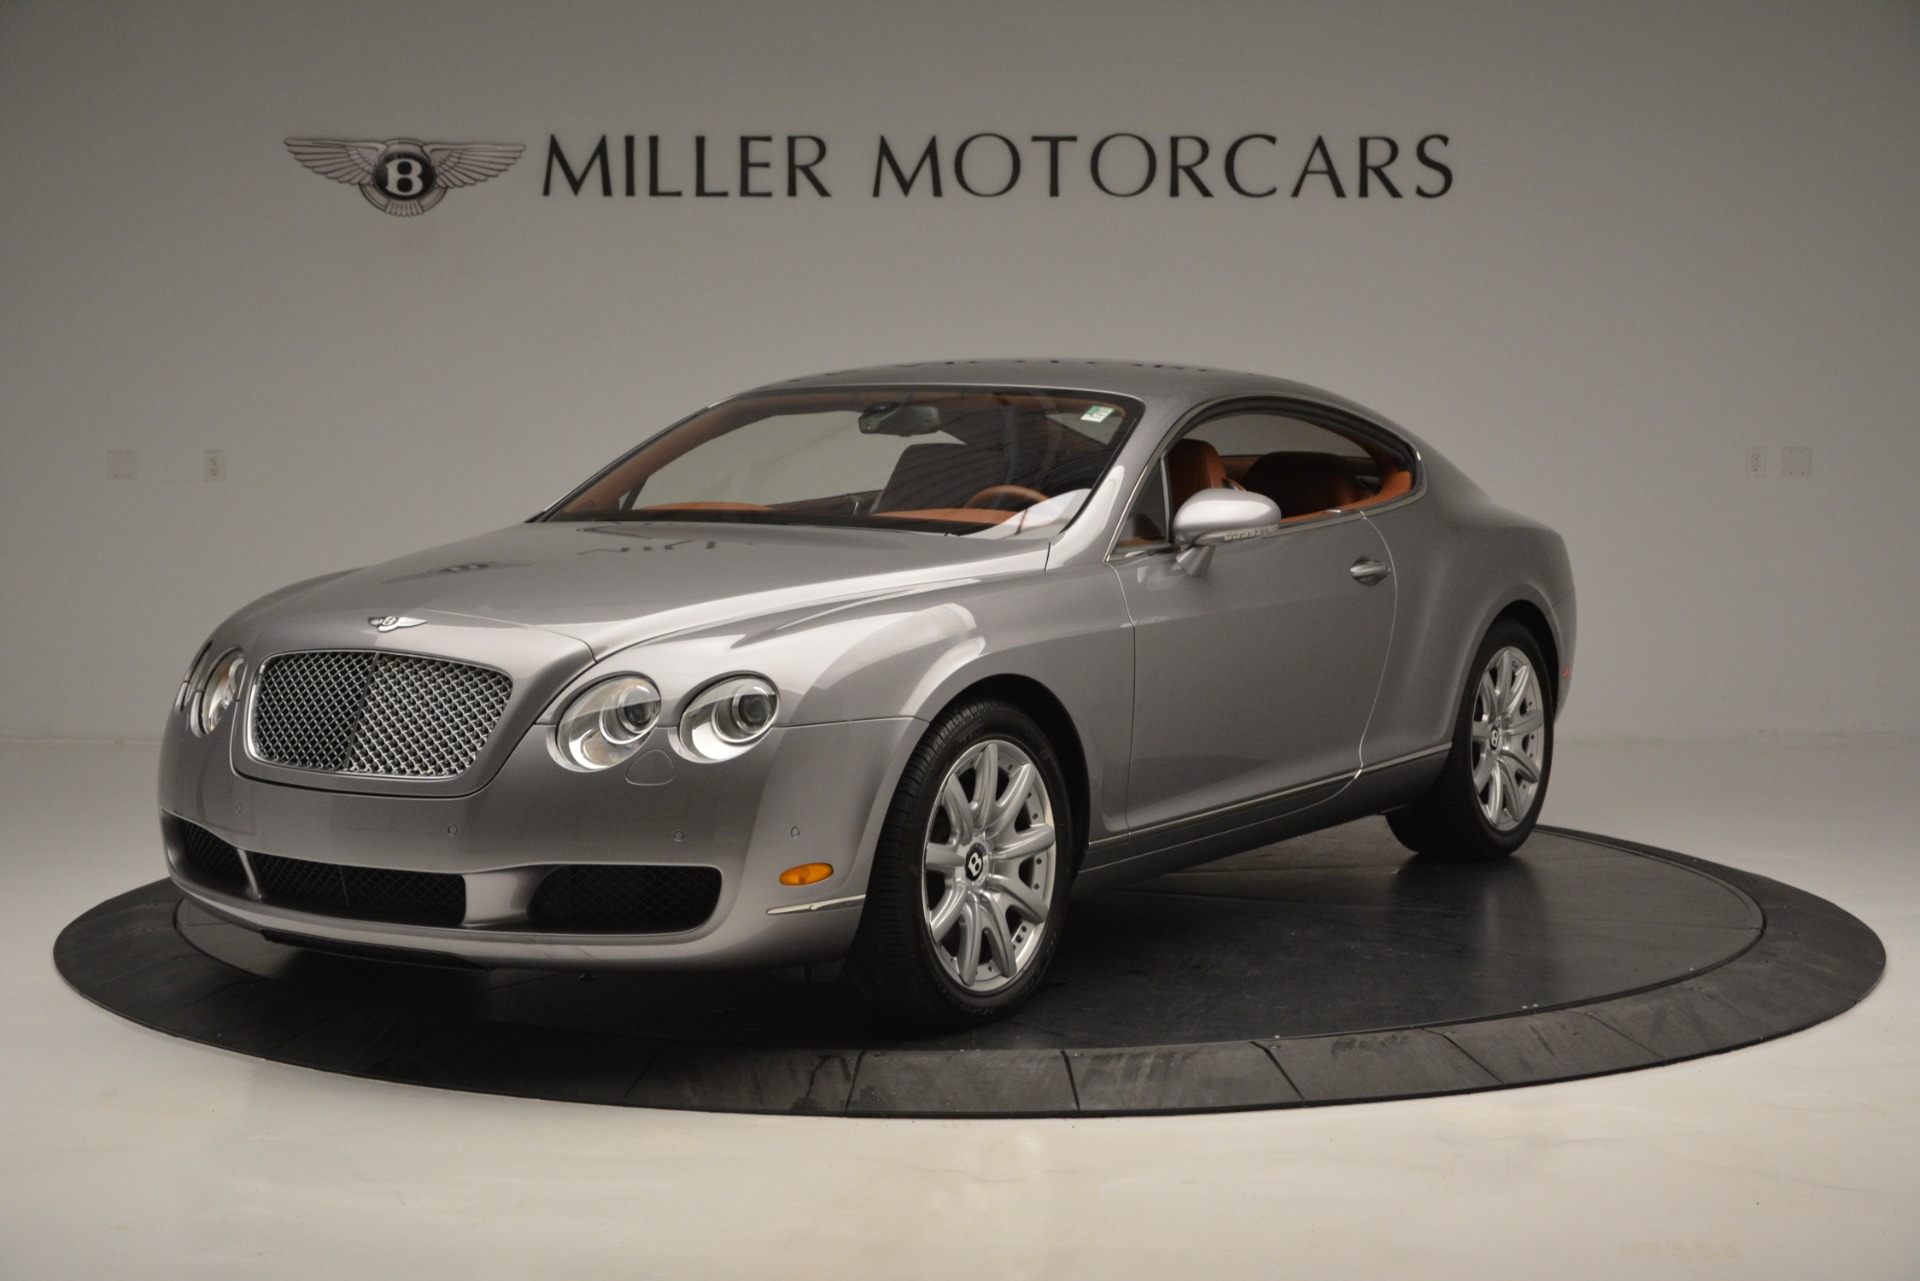 Used 2005 Bentley Continental GT GT Turbo for sale Sold at Pagani of Greenwich in Greenwich CT 06830 1